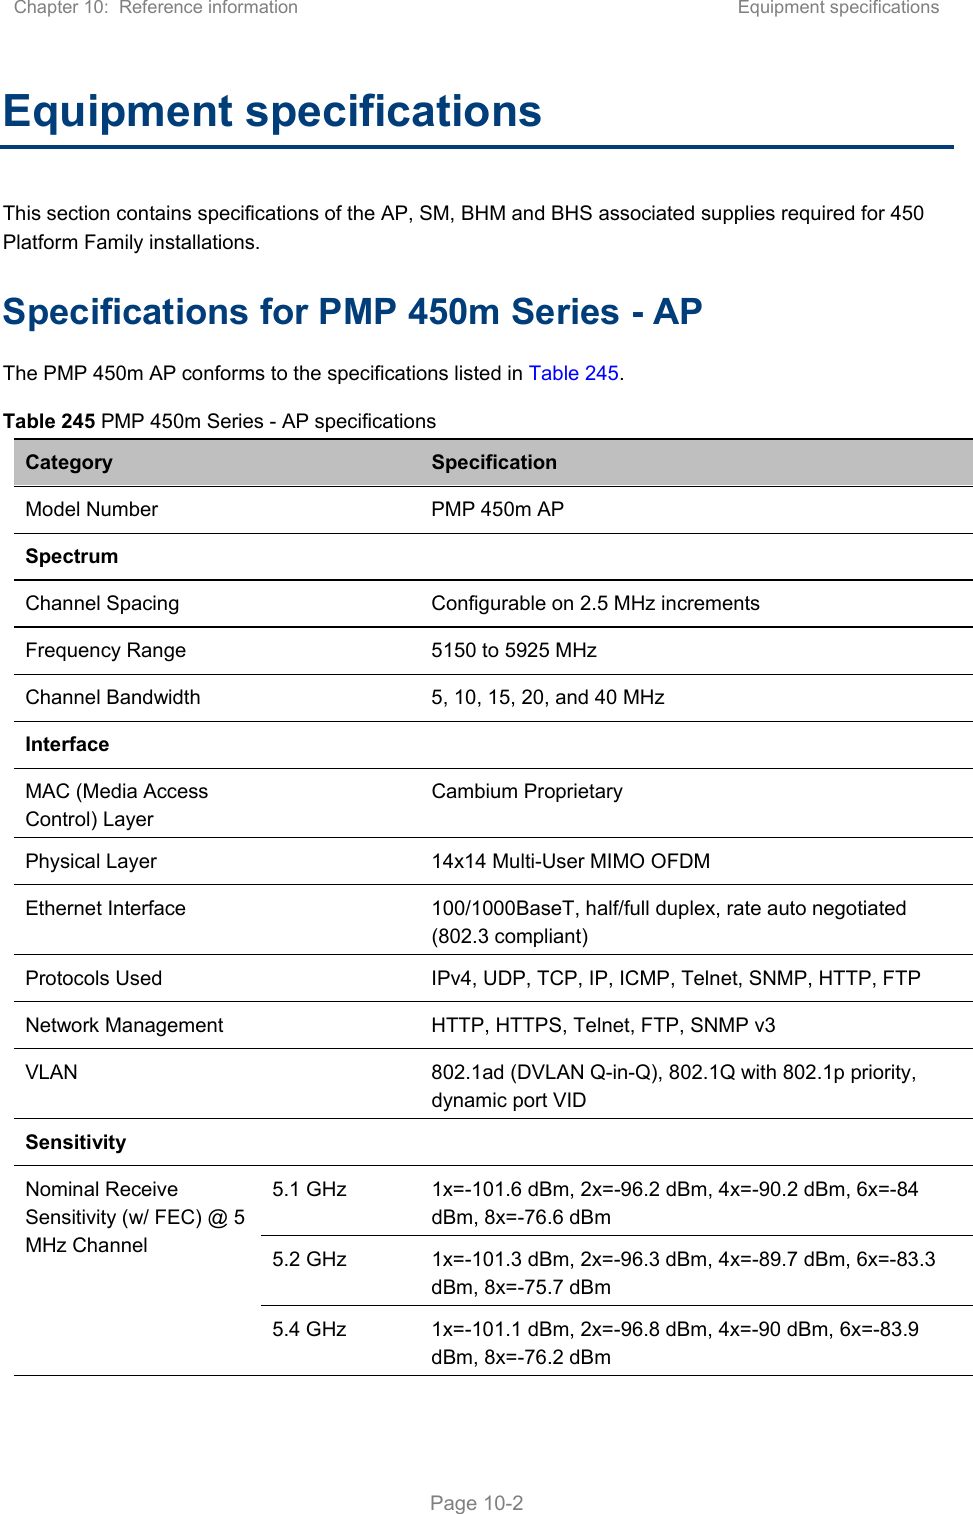 Chapter 10:  Reference information  Equipment specifications   Page 10-2 Equipment specifications This section contains specifications of the AP, SM, BHM and BHS associated supplies required for 450 Platform Family installations. Specifications for PMP 450m Series - AP The PMP 450m AP conforms to the specifications listed in Table 245. Table 245 PMP 450m Series - AP specifications Category   Specification Model Number    PMP 450m AP Spectrum    Channel Spacing    Configurable on 2.5 MHz increments Frequency Range    5150 to 5925 MHz Channel Bandwidth    5, 10, 15, 20, and 40 MHz Interface    MAC (Media Access Control) Layer   Cambium Proprietary Physical Layer    14x14 Multi-User MIMO OFDM Ethernet Interface    100/1000BaseT, half/full duplex, rate auto negotiated (802.3 compliant) Protocols Used    IPv4, UDP, TCP, IP, ICMP, Telnet, SNMP, HTTP, FTP Network Management    HTTP, HTTPS, Telnet, FTP, SNMP v3 VLAN    802.1ad (DVLAN Q-in-Q), 802.1Q with 802.1p priority, dynamic port VID Sensitivity     Nominal Receive Sensitivity (w/ FEC) @ 5 MHz Channel 5.1 GHz  1x=-101.6 dBm, 2x=-96.2 dBm, 4x=-90.2 dBm, 6x=-84 dBm, 8x=-76.6 dBm 5.2 GHz  1x=-101.3 dBm, 2x=-96.3 dBm, 4x=-89.7 dBm, 6x=-83.3 dBm, 8x=-75.7 dBm 5.4 GHz  1x=-101.1 dBm, 2x=-96.8 dBm, 4x=-90 dBm, 6x=-83.9 dBm, 8x=-76.2 dBm 